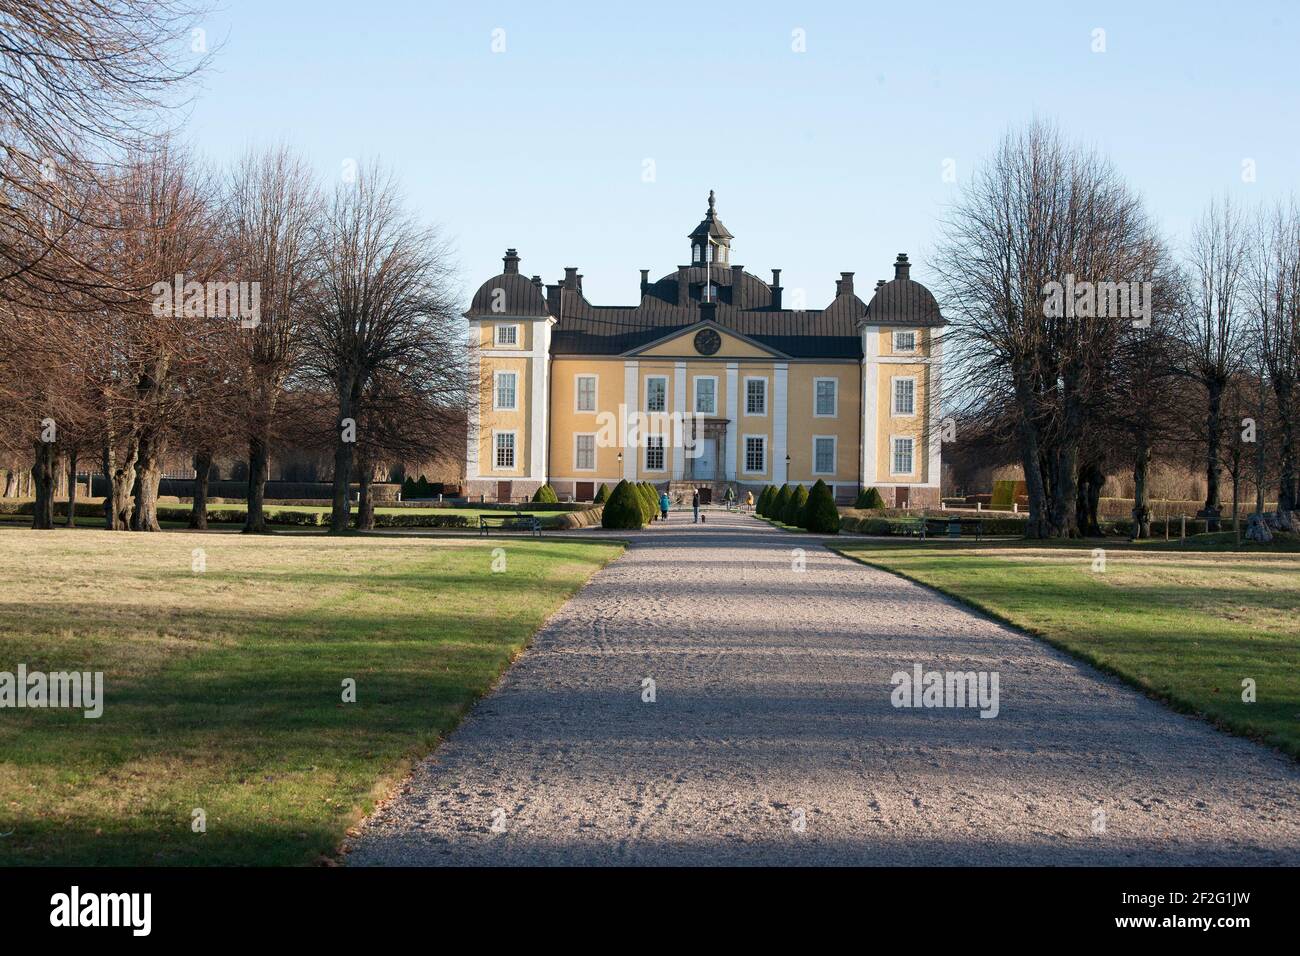 STRÖMSHOLM PALACE in Västmanland is a Swedish Royal palace.The Baroque palace is located on an island in Kolbäcksån River.its on a fortress from 1550s established by King Gustav Vasa Stock Photo